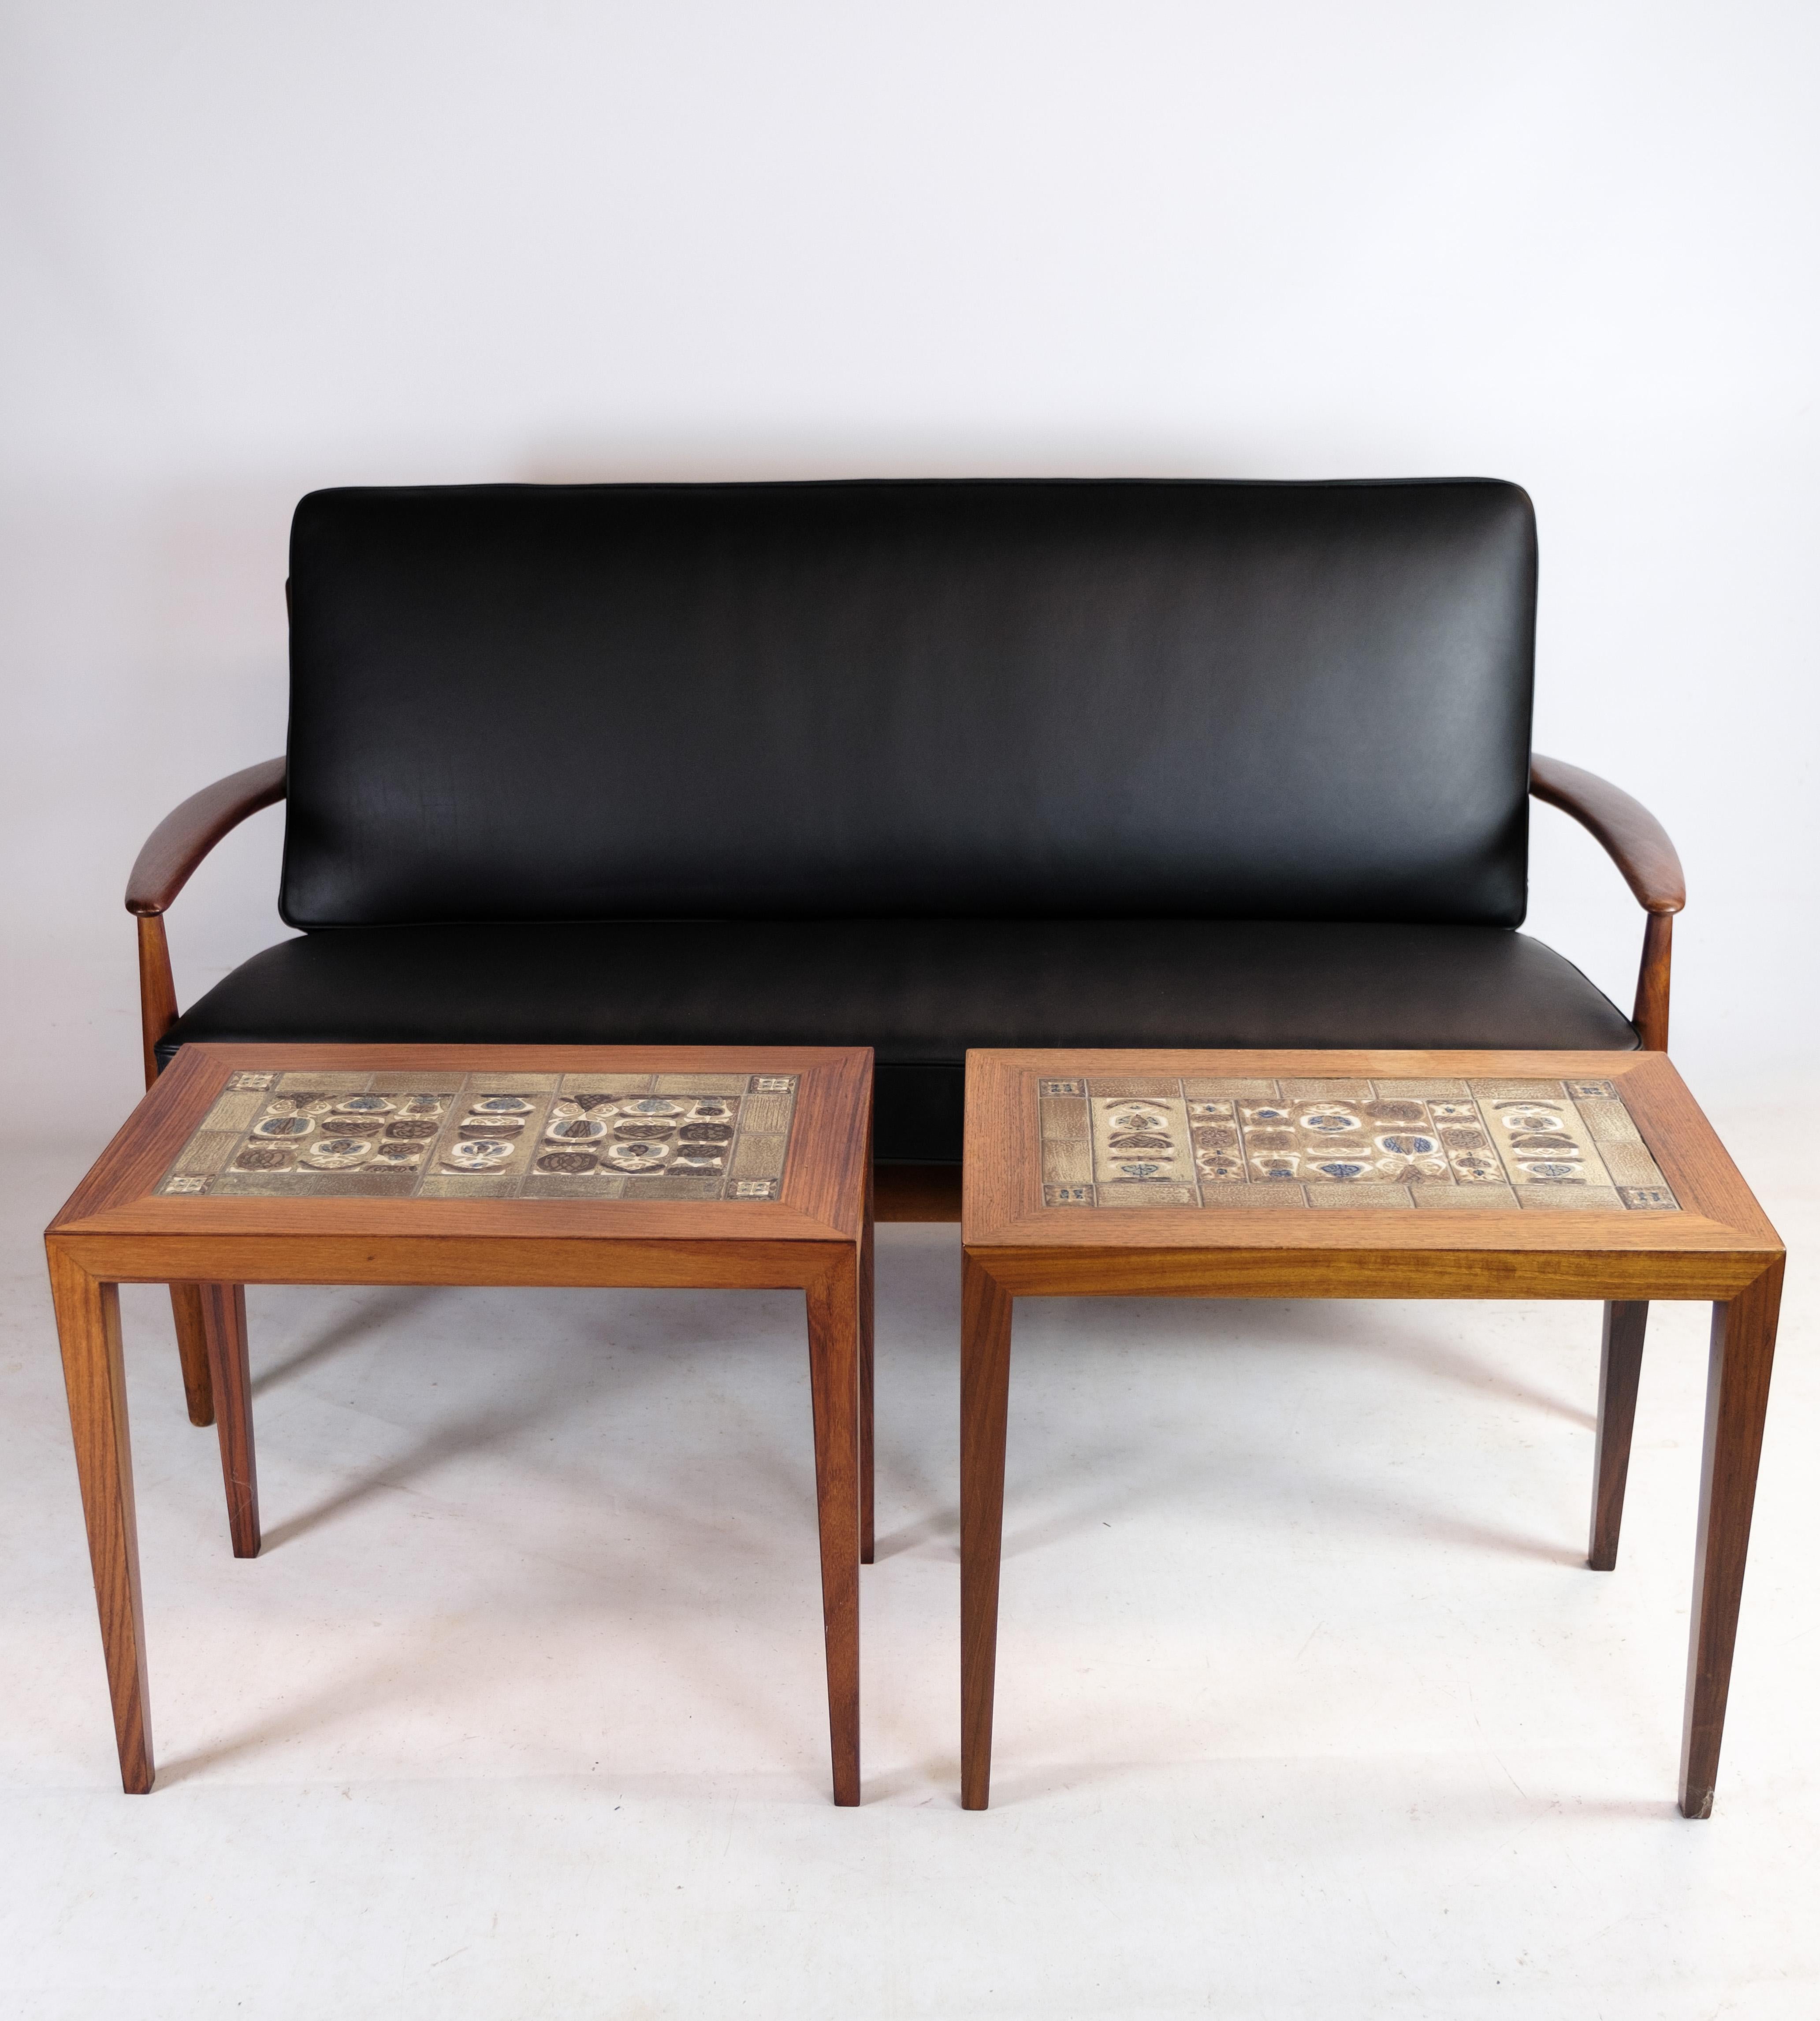 2 Seater Sofa Model 118 Made With a Teak Frame By Grete Jalk From 1960s For Sale 7